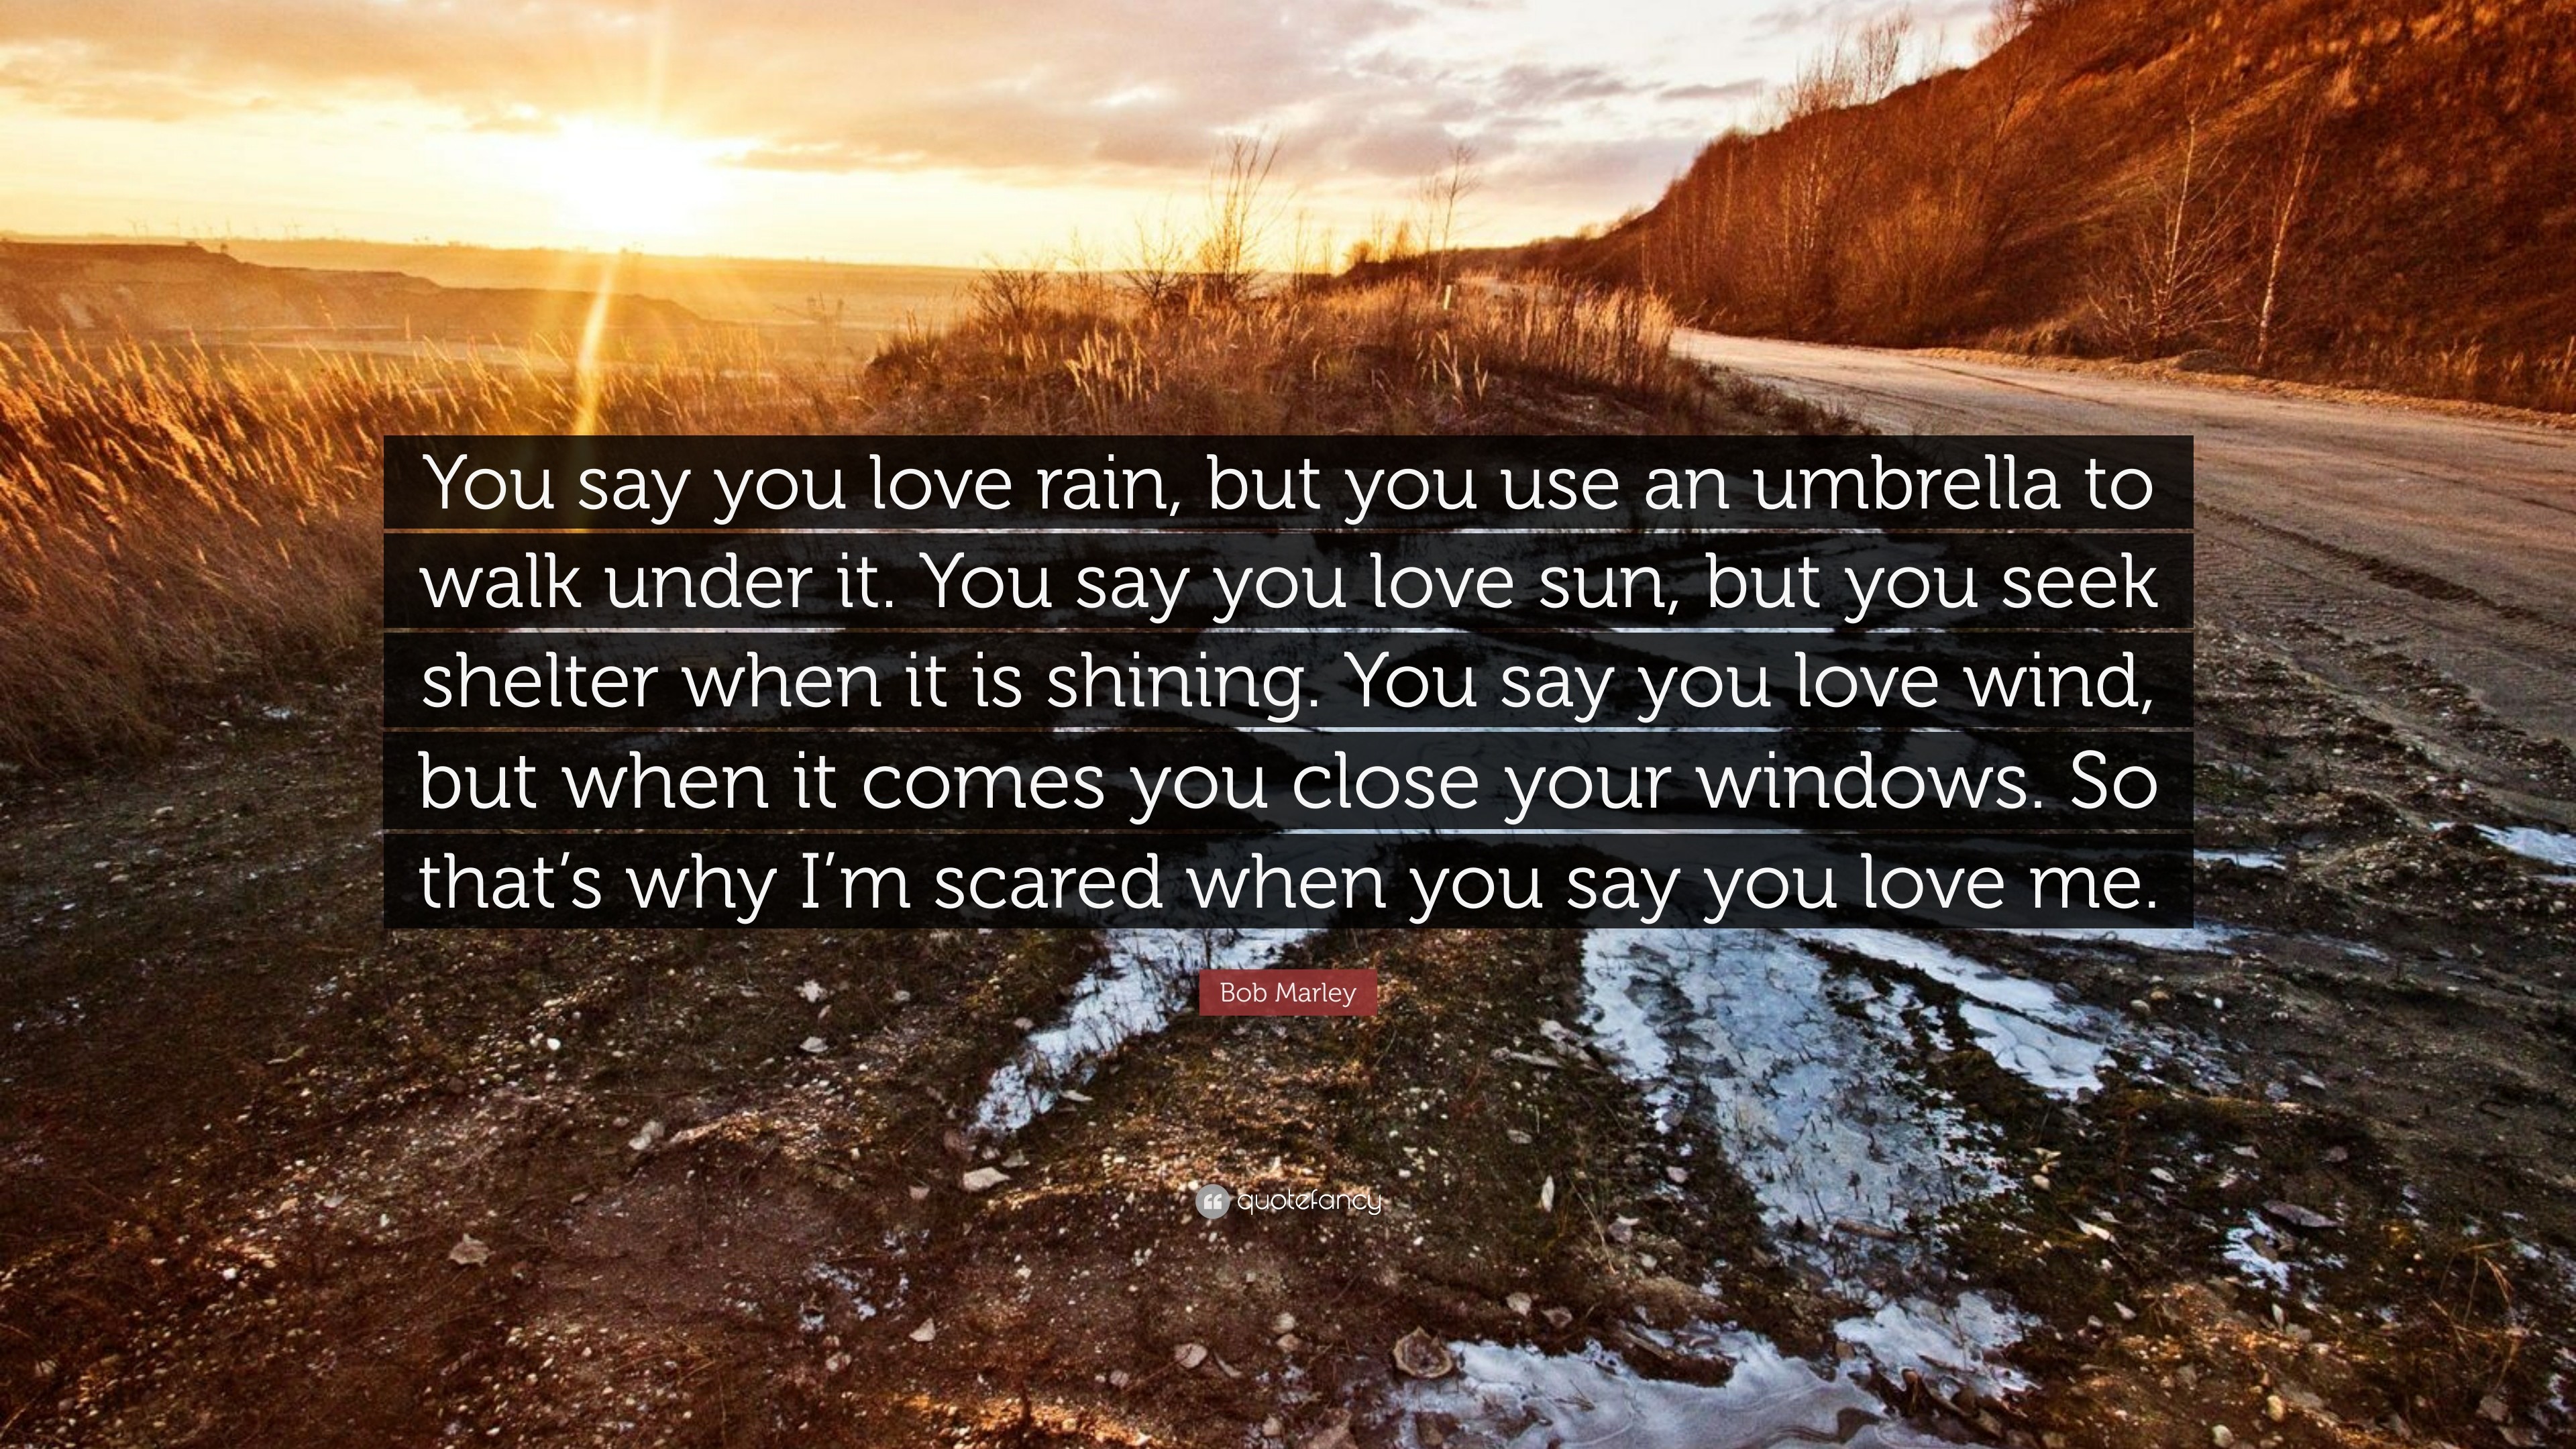 3840x2160 Bob Marley Quote: “You say you love rain, but you use an umbrella